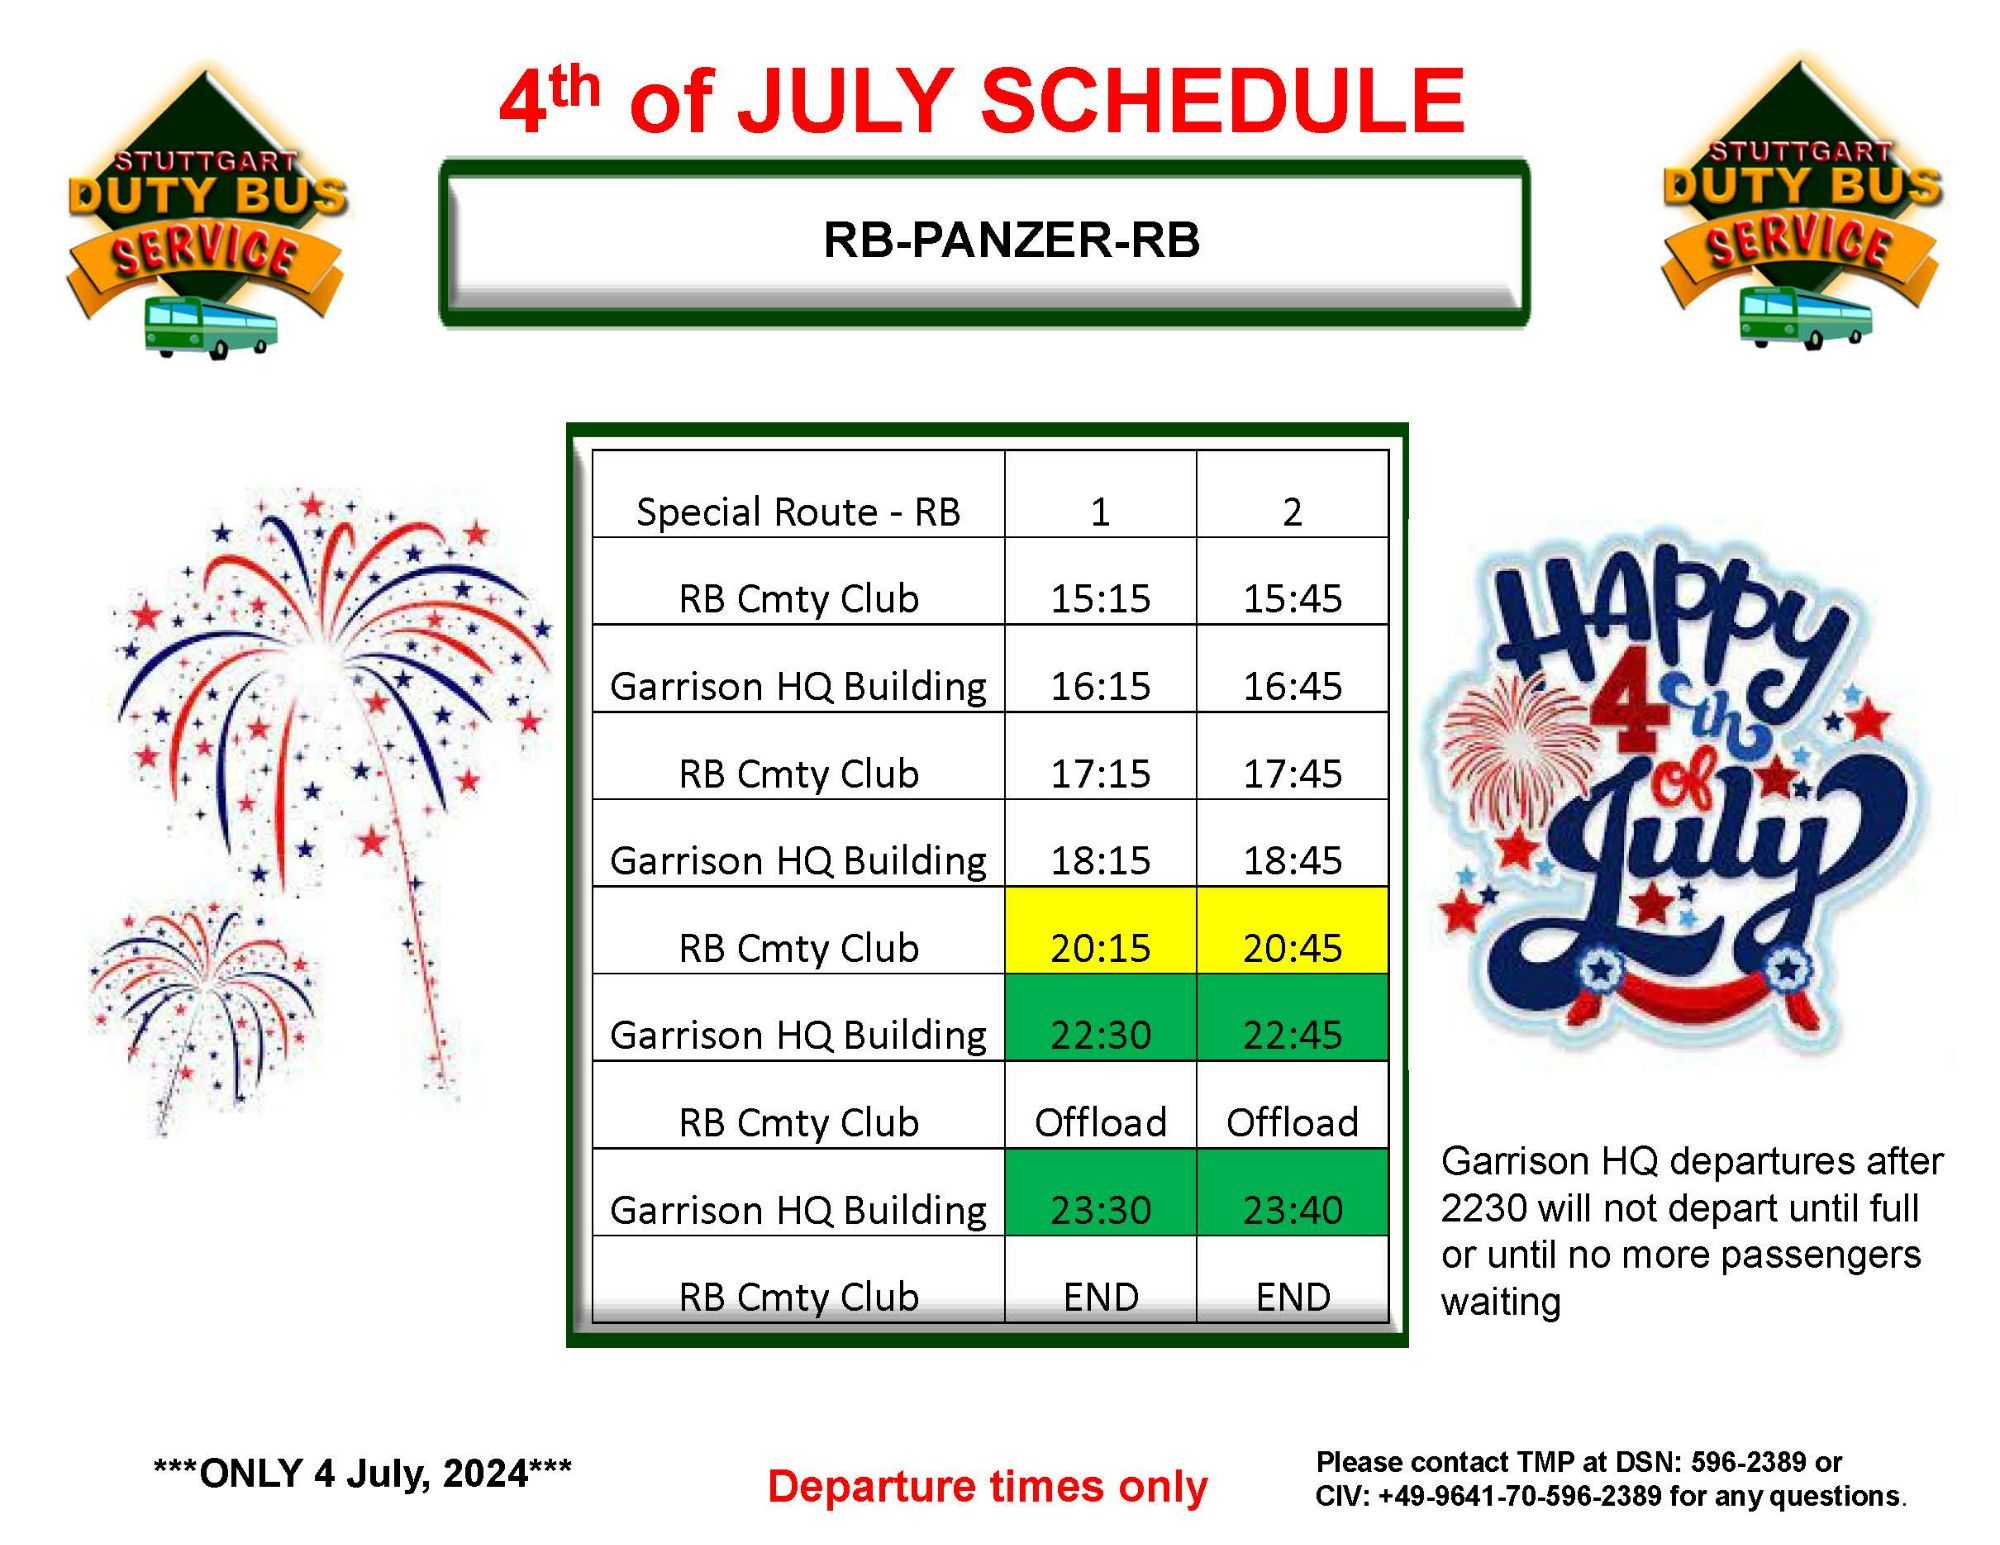 ST_4th of July Bus Schedule - 2024_Page_5.jpg